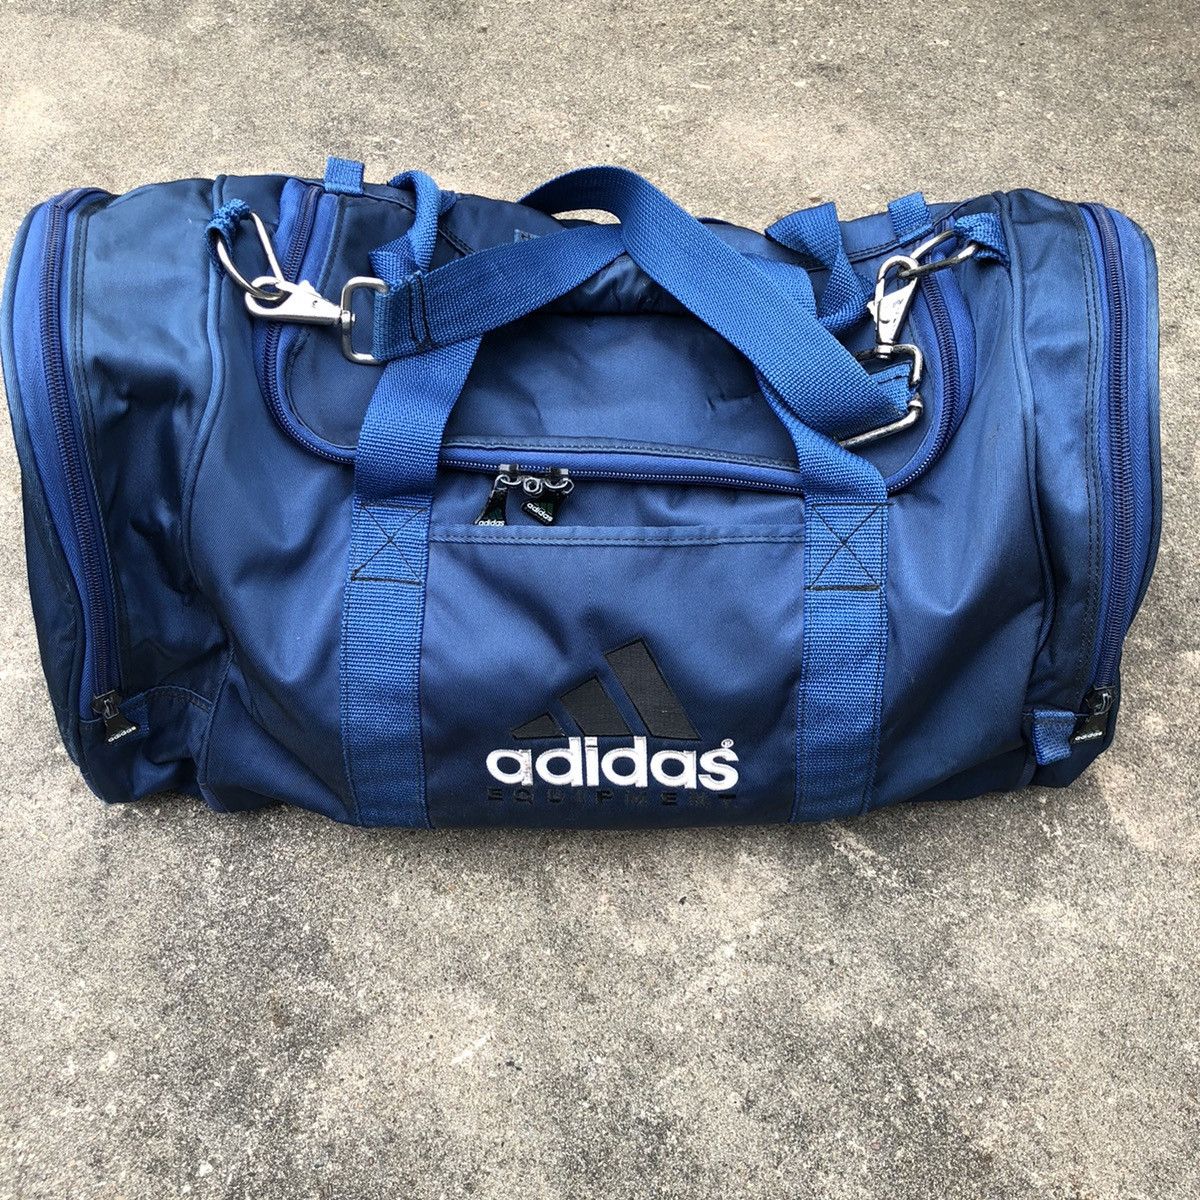 Adidas Vintage Adidas Equipment Duffel Bag Size ONE SIZE - 2 Preview